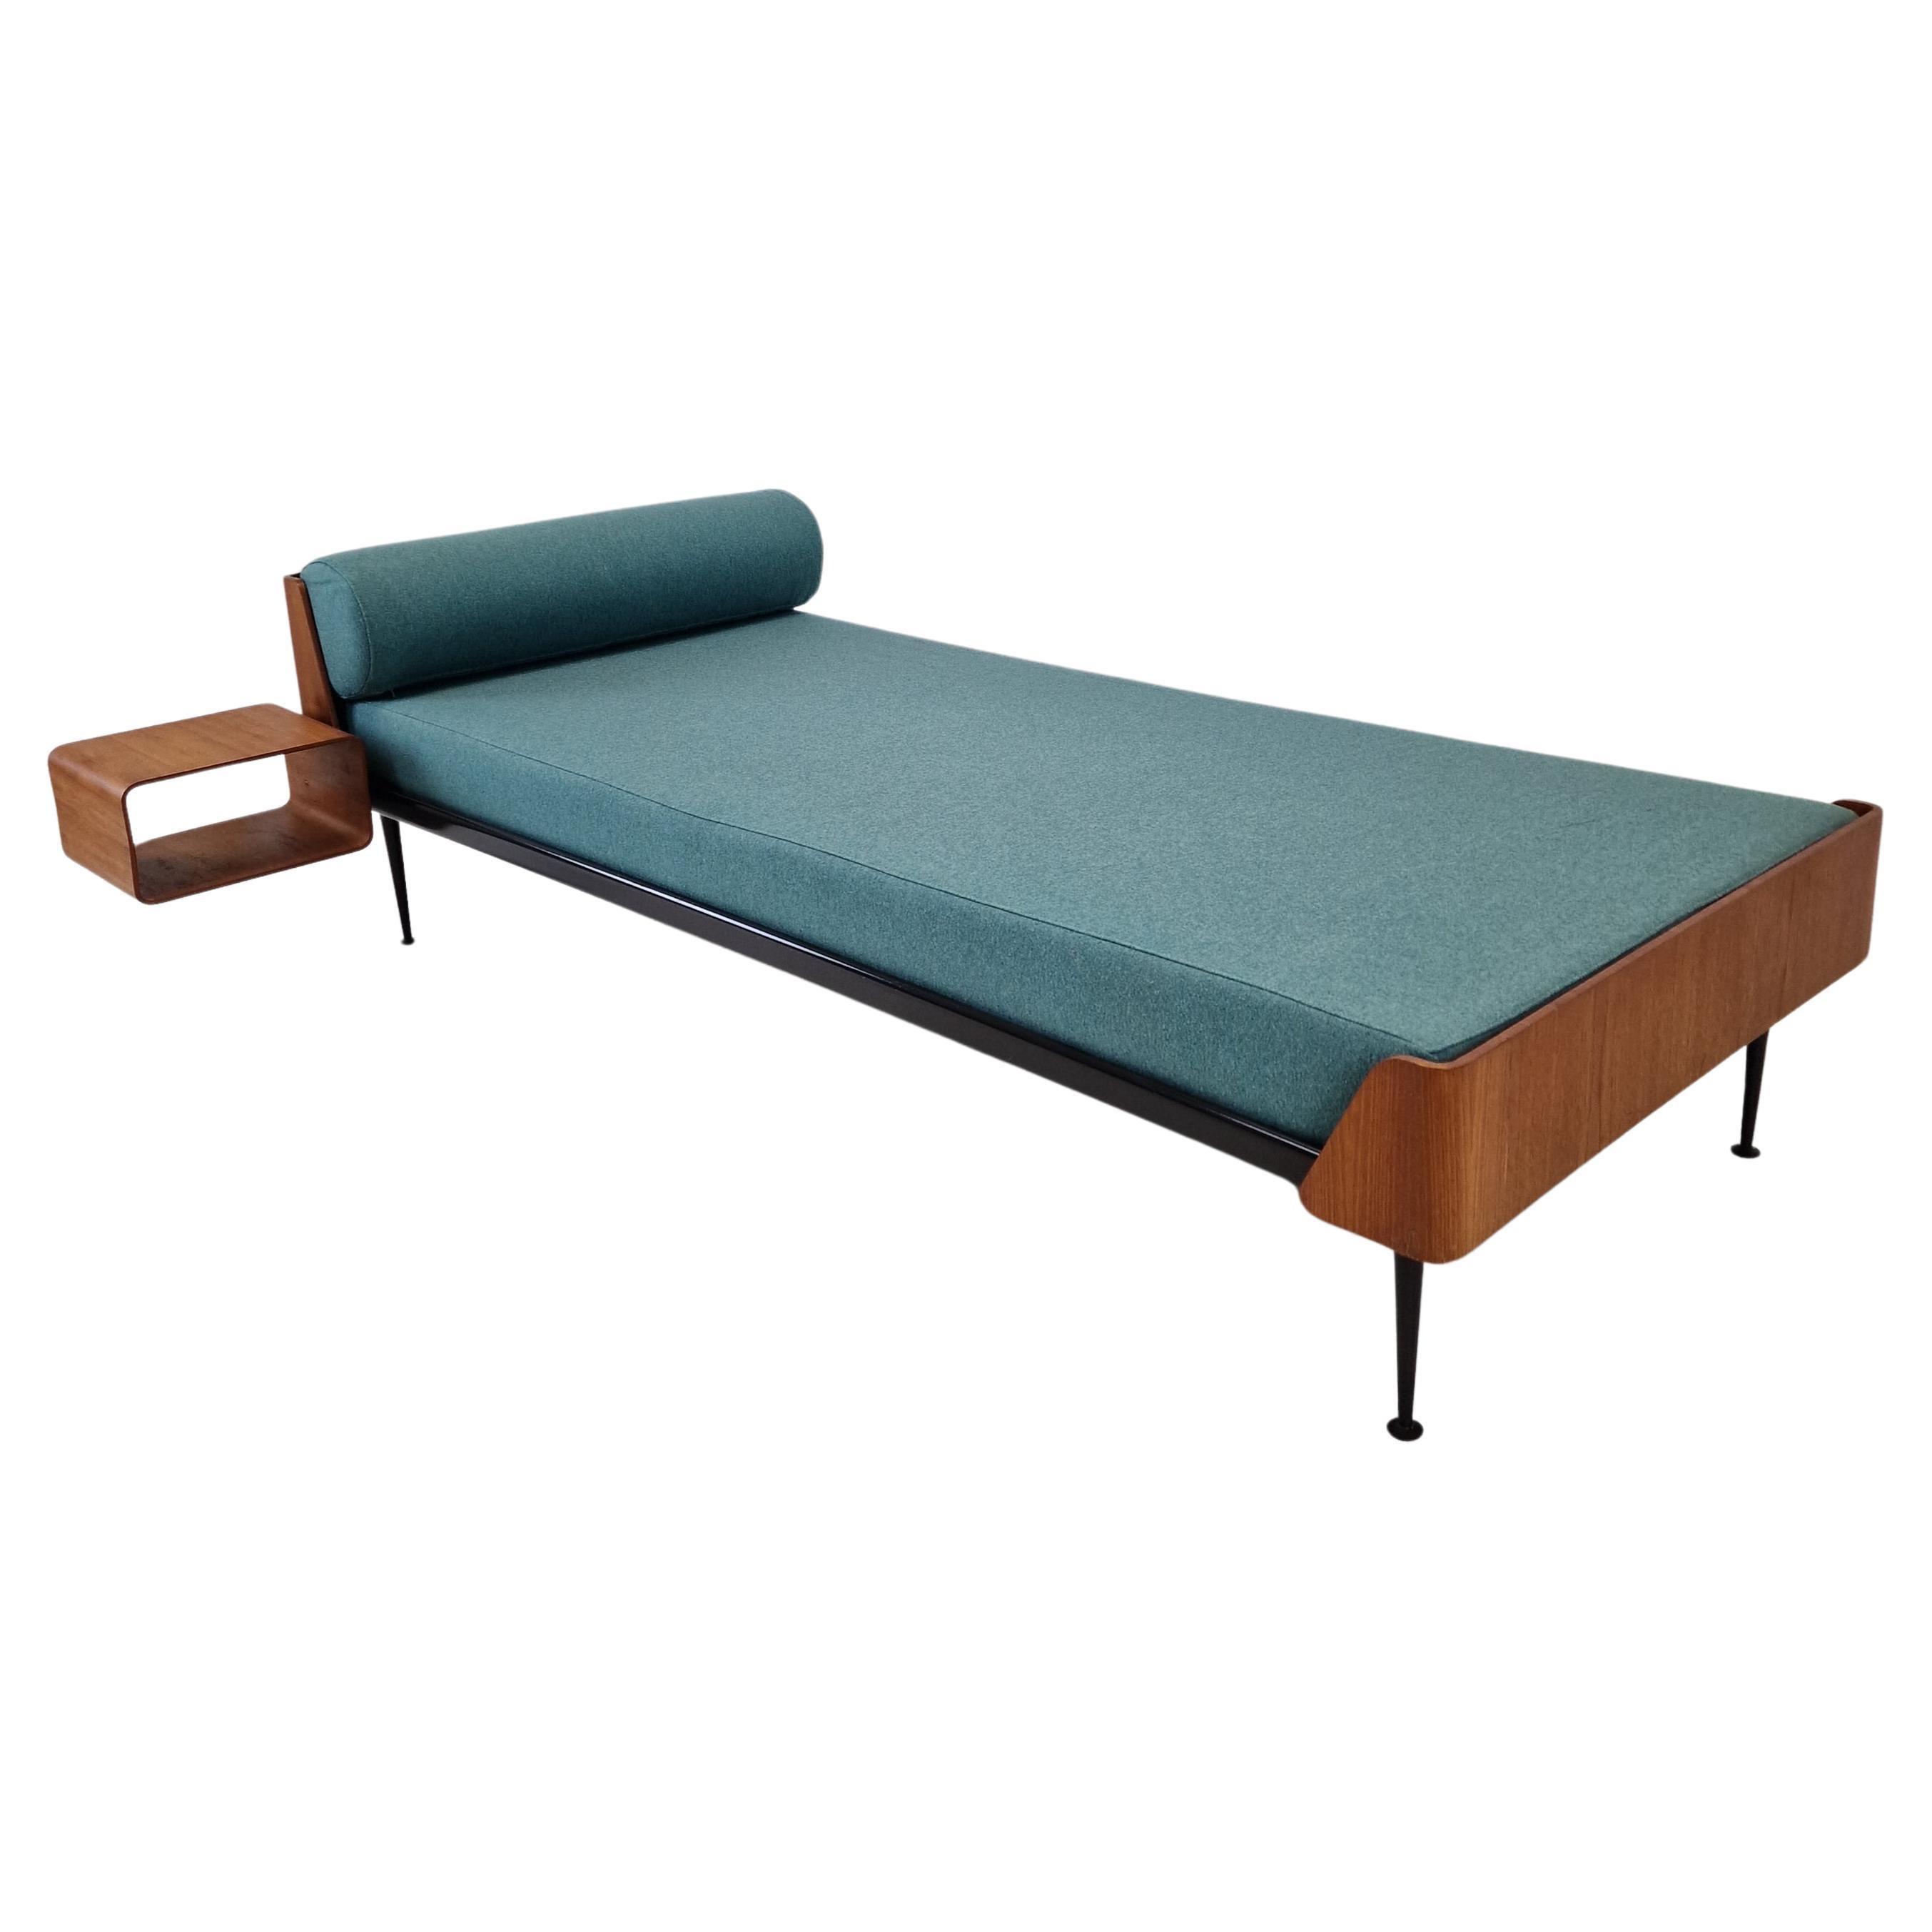 Friso Kramer ‘Euroika’ daybed for Auping Holland, 1960's For Sale